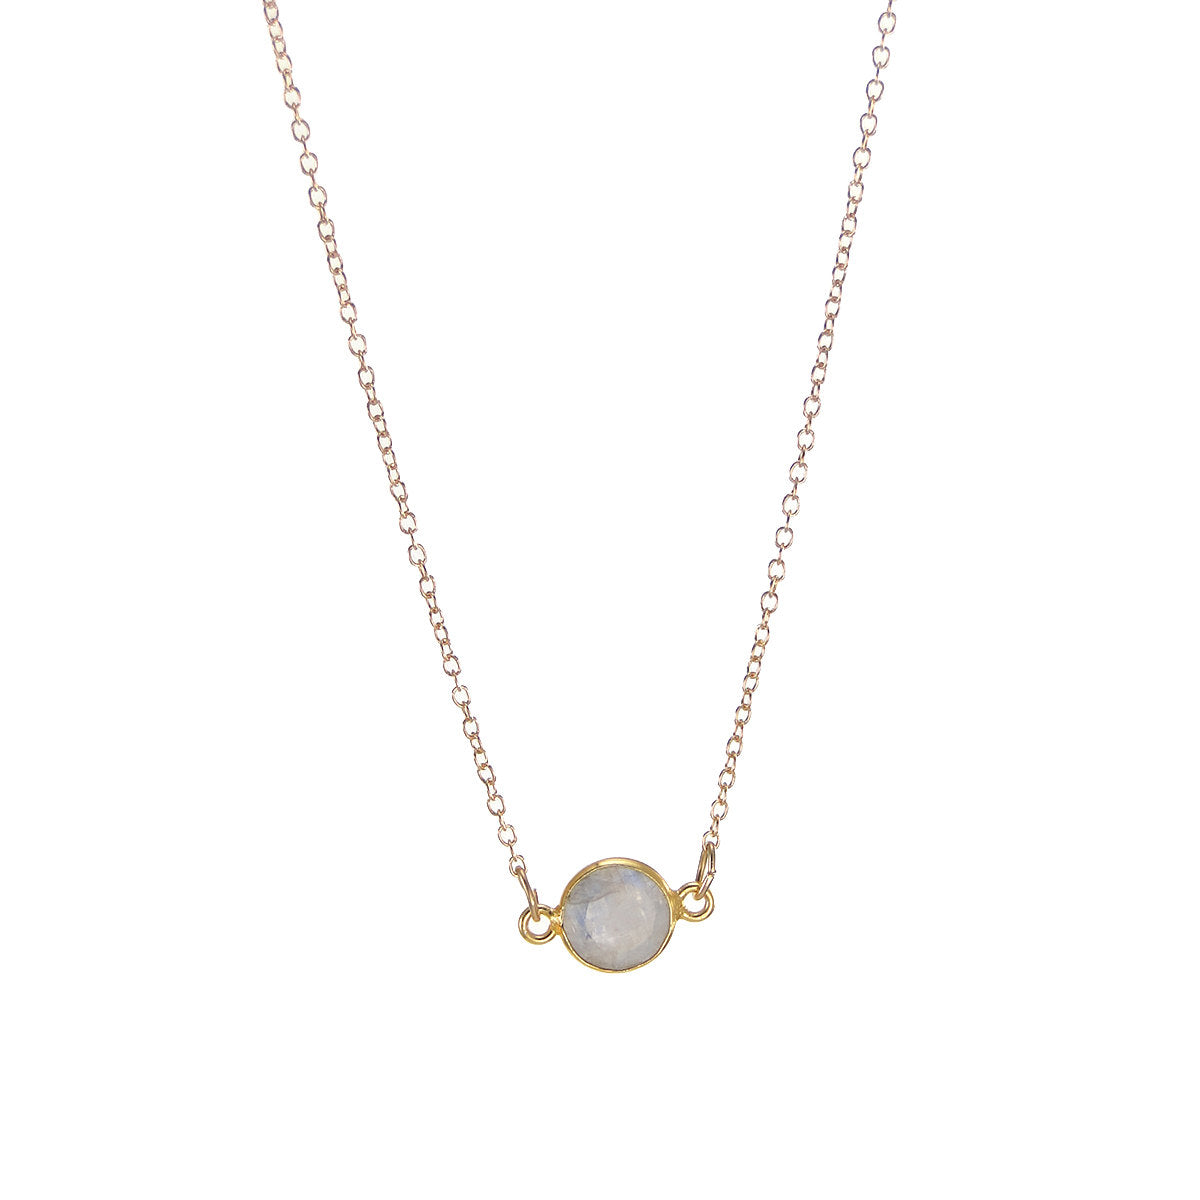 Moonstone Delicate Gemstone Necklace - Tiny Gemstone Necklace - Faceted Stone Jewelry Necklace - Little Dainty 14K Gold Filled Necklace